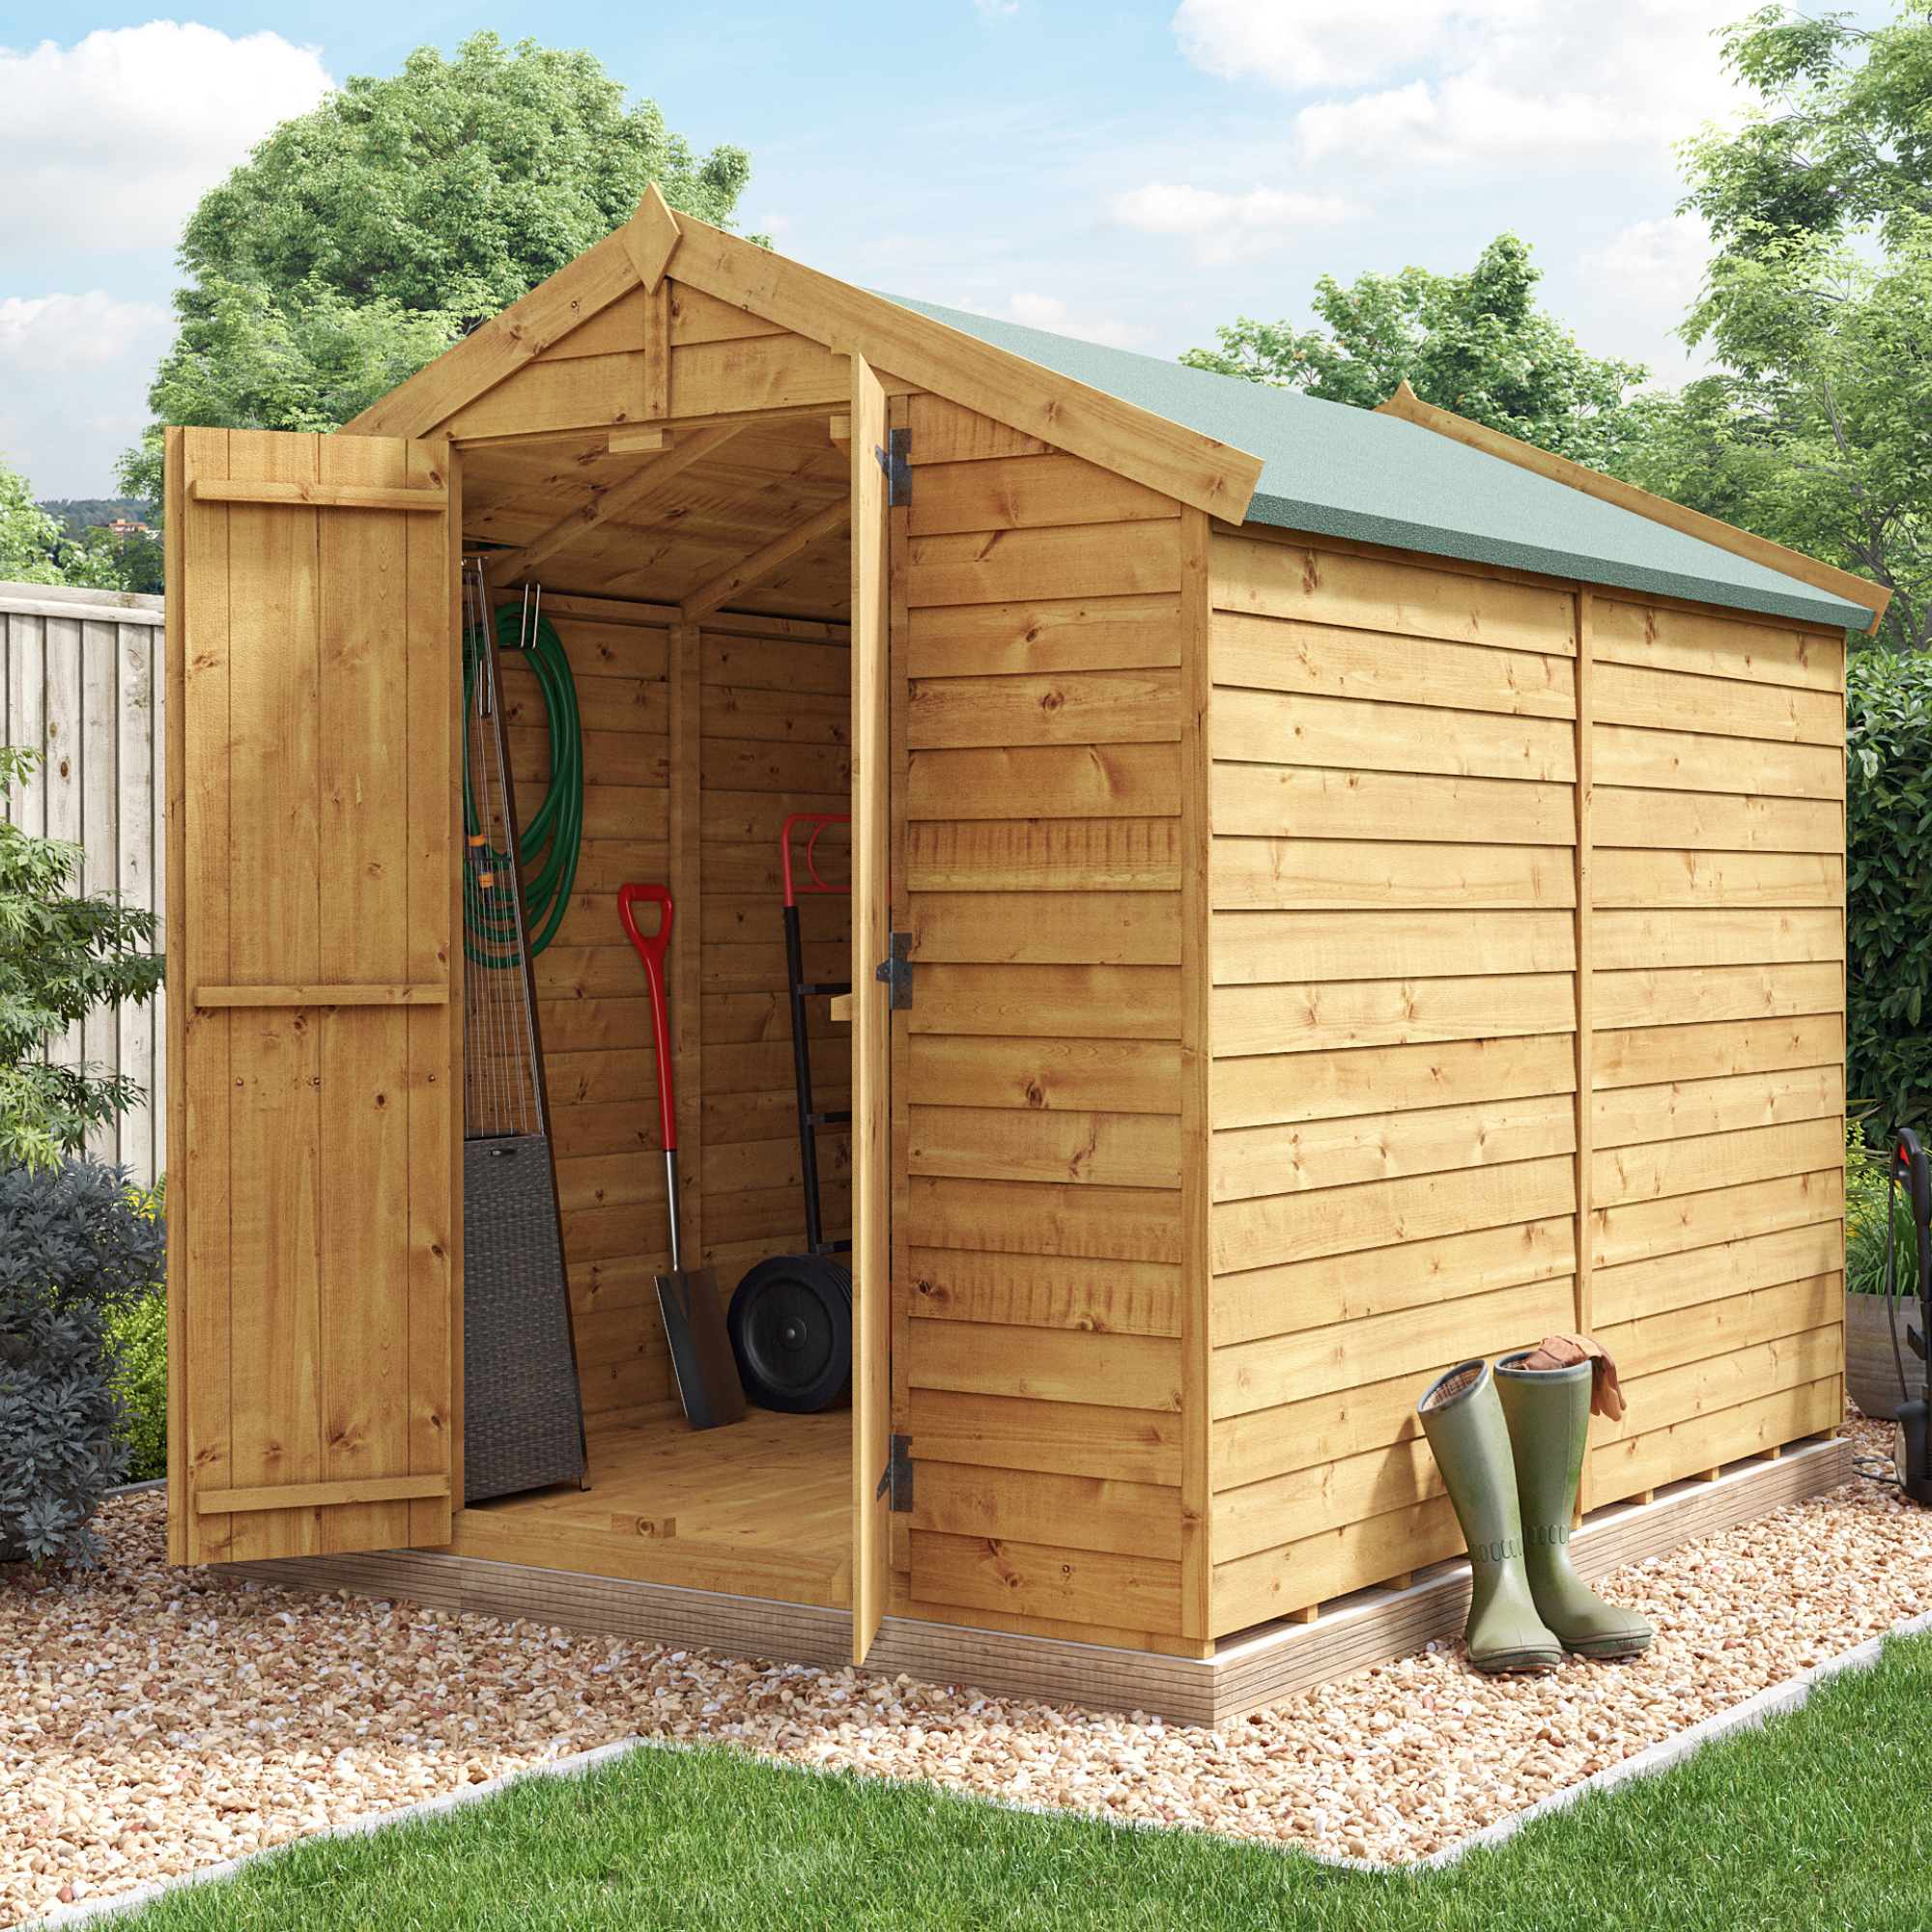 8 x 6 Shed - BillyOh Keeper Overlap Apex Wooden Shed - Windowless 8x6 Garden Shed